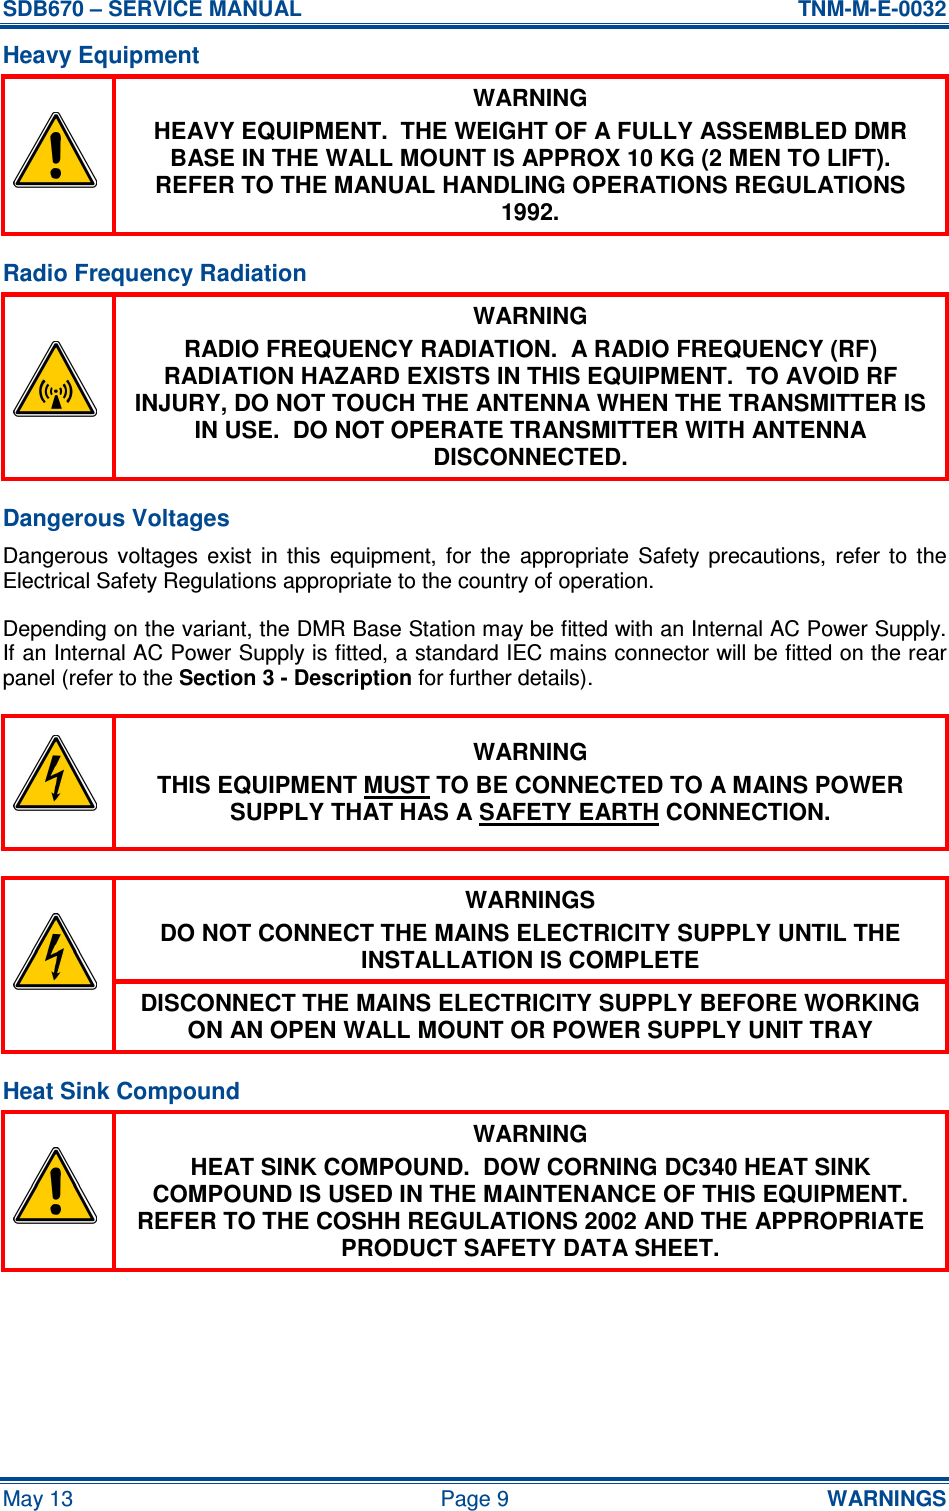 SDB670 – SERVICE MANUAL  TNM-M-E-0032 May 13  Page 9  WARNINGS Heavy Equipment  WARNING HEAVY EQUIPMENT.  THE WEIGHT OF A FULLY ASSEMBLED DMR BASE IN THE WALL MOUNT IS APPROX 10 KG (2 MEN TO LIFT).  REFER TO THE MANUAL HANDLING OPERATIONS REGULATIONS 1992. Radio Frequency Radiation  WARNING RADIO FREQUENCY RADIATION.  A RADIO FREQUENCY (RF) RADIATION HAZARD EXISTS IN THIS EQUIPMENT.  TO AVOID RF INJURY, DO NOT TOUCH THE ANTENNA WHEN THE TRANSMITTER IS IN USE.  DO NOT OPERATE TRANSMITTER WITH ANTENNA DISCONNECTED. Dangerous Voltages Dangerous  voltages  exist  in  this  equipment,  for  the  appropriate  Safety  precautions,  refer  to  the Electrical Safety Regulations appropriate to the country of operation. Depending on the variant, the DMR Base Station may be fitted with an Internal AC Power Supply.  If an Internal AC Power Supply is fitted, a standard IEC mains connector will be fitted on the rear panel (refer to the Section 3 - Description for further details).  WARNING THIS EQUIPMENT MUST TO BE CONNECTED TO A MAINS POWER SUPPLY THAT HAS A SAFETY EARTH CONNECTION.  WARNINGS DO NOT CONNECT THE MAINS ELECTRICITY SUPPLY UNTIL THE INSTALLATION IS COMPLETE  DISCONNECT THE MAINS ELECTRICITY SUPPLY BEFORE WORKING ON AN OPEN WALL MOUNT OR POWER SUPPLY UNIT TRAY Heat Sink Compound  WARNING HEAT SINK COMPOUND.  DOW CORNING DC340 HEAT SINK COMPOUND IS USED IN THE MAINTENANCE OF THIS EQUIPMENT.  REFER TO THE COSHH REGULATIONS 2002 AND THE APPROPRIATE PRODUCT SAFETY DATA SHEET.  